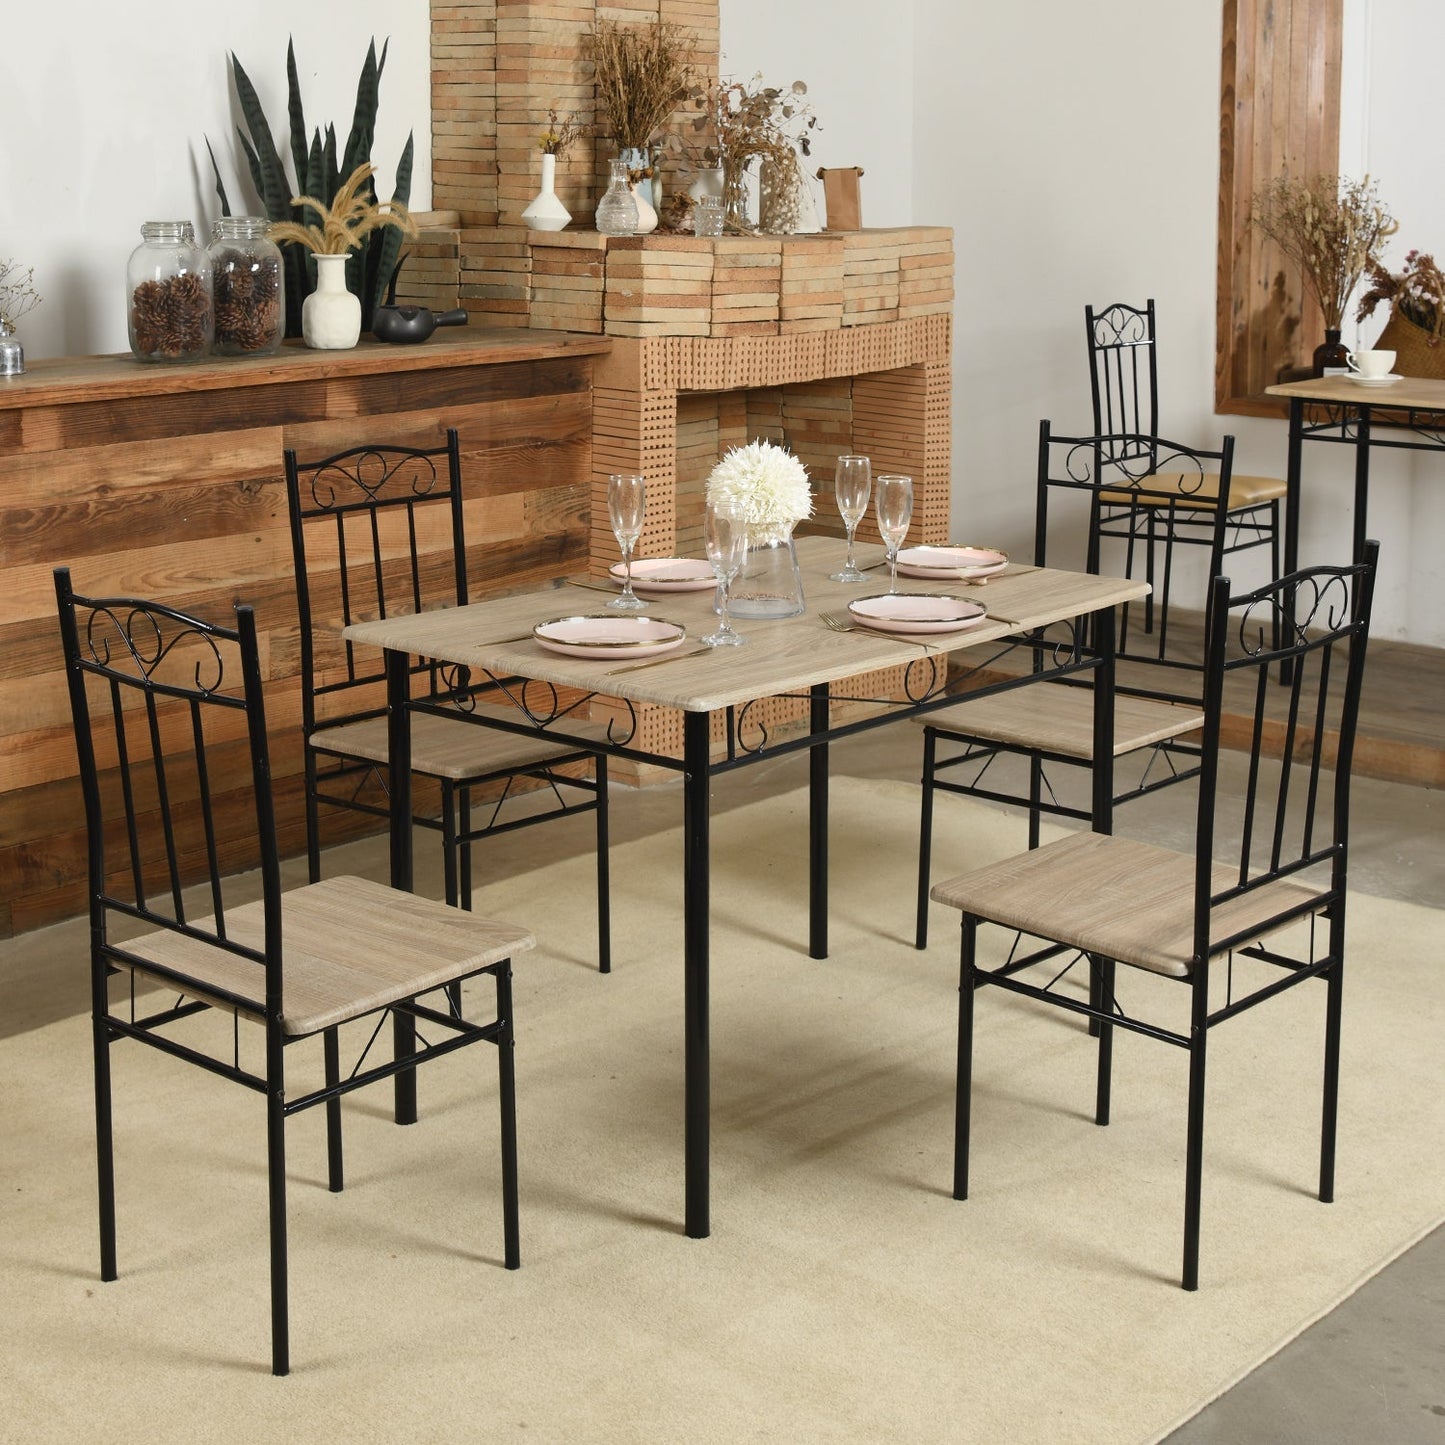 NORSEMAN 5 Piece Dining Set, Rectangular Dining Table with 4 Chairs 109*69*75cm - Colors Available